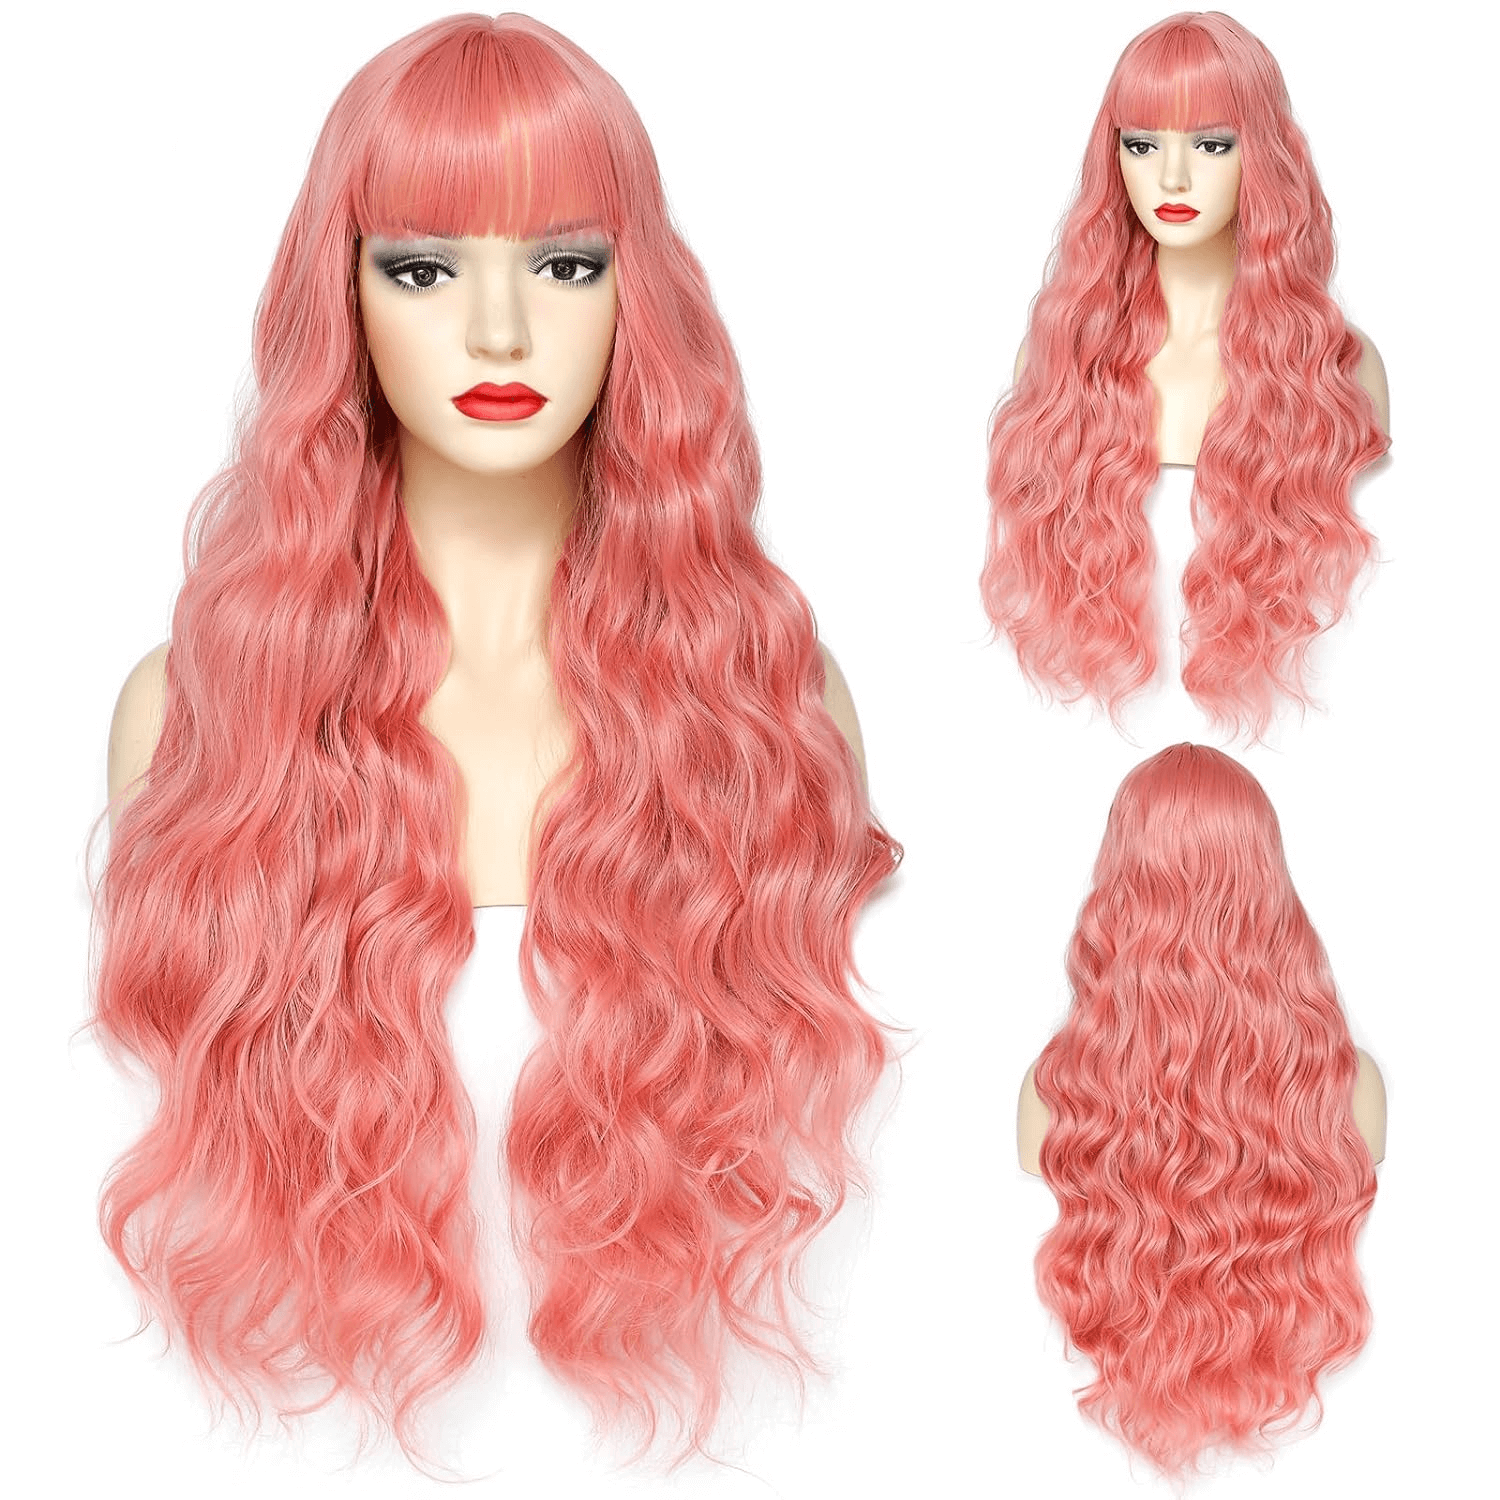 Awahair Pink Wig with Bangs Pink Wig for Women Synthetic 30 Inch Long Wavy Wigs Halloween Cosplay Wig Daily Party Use (Pink,30 Inch)